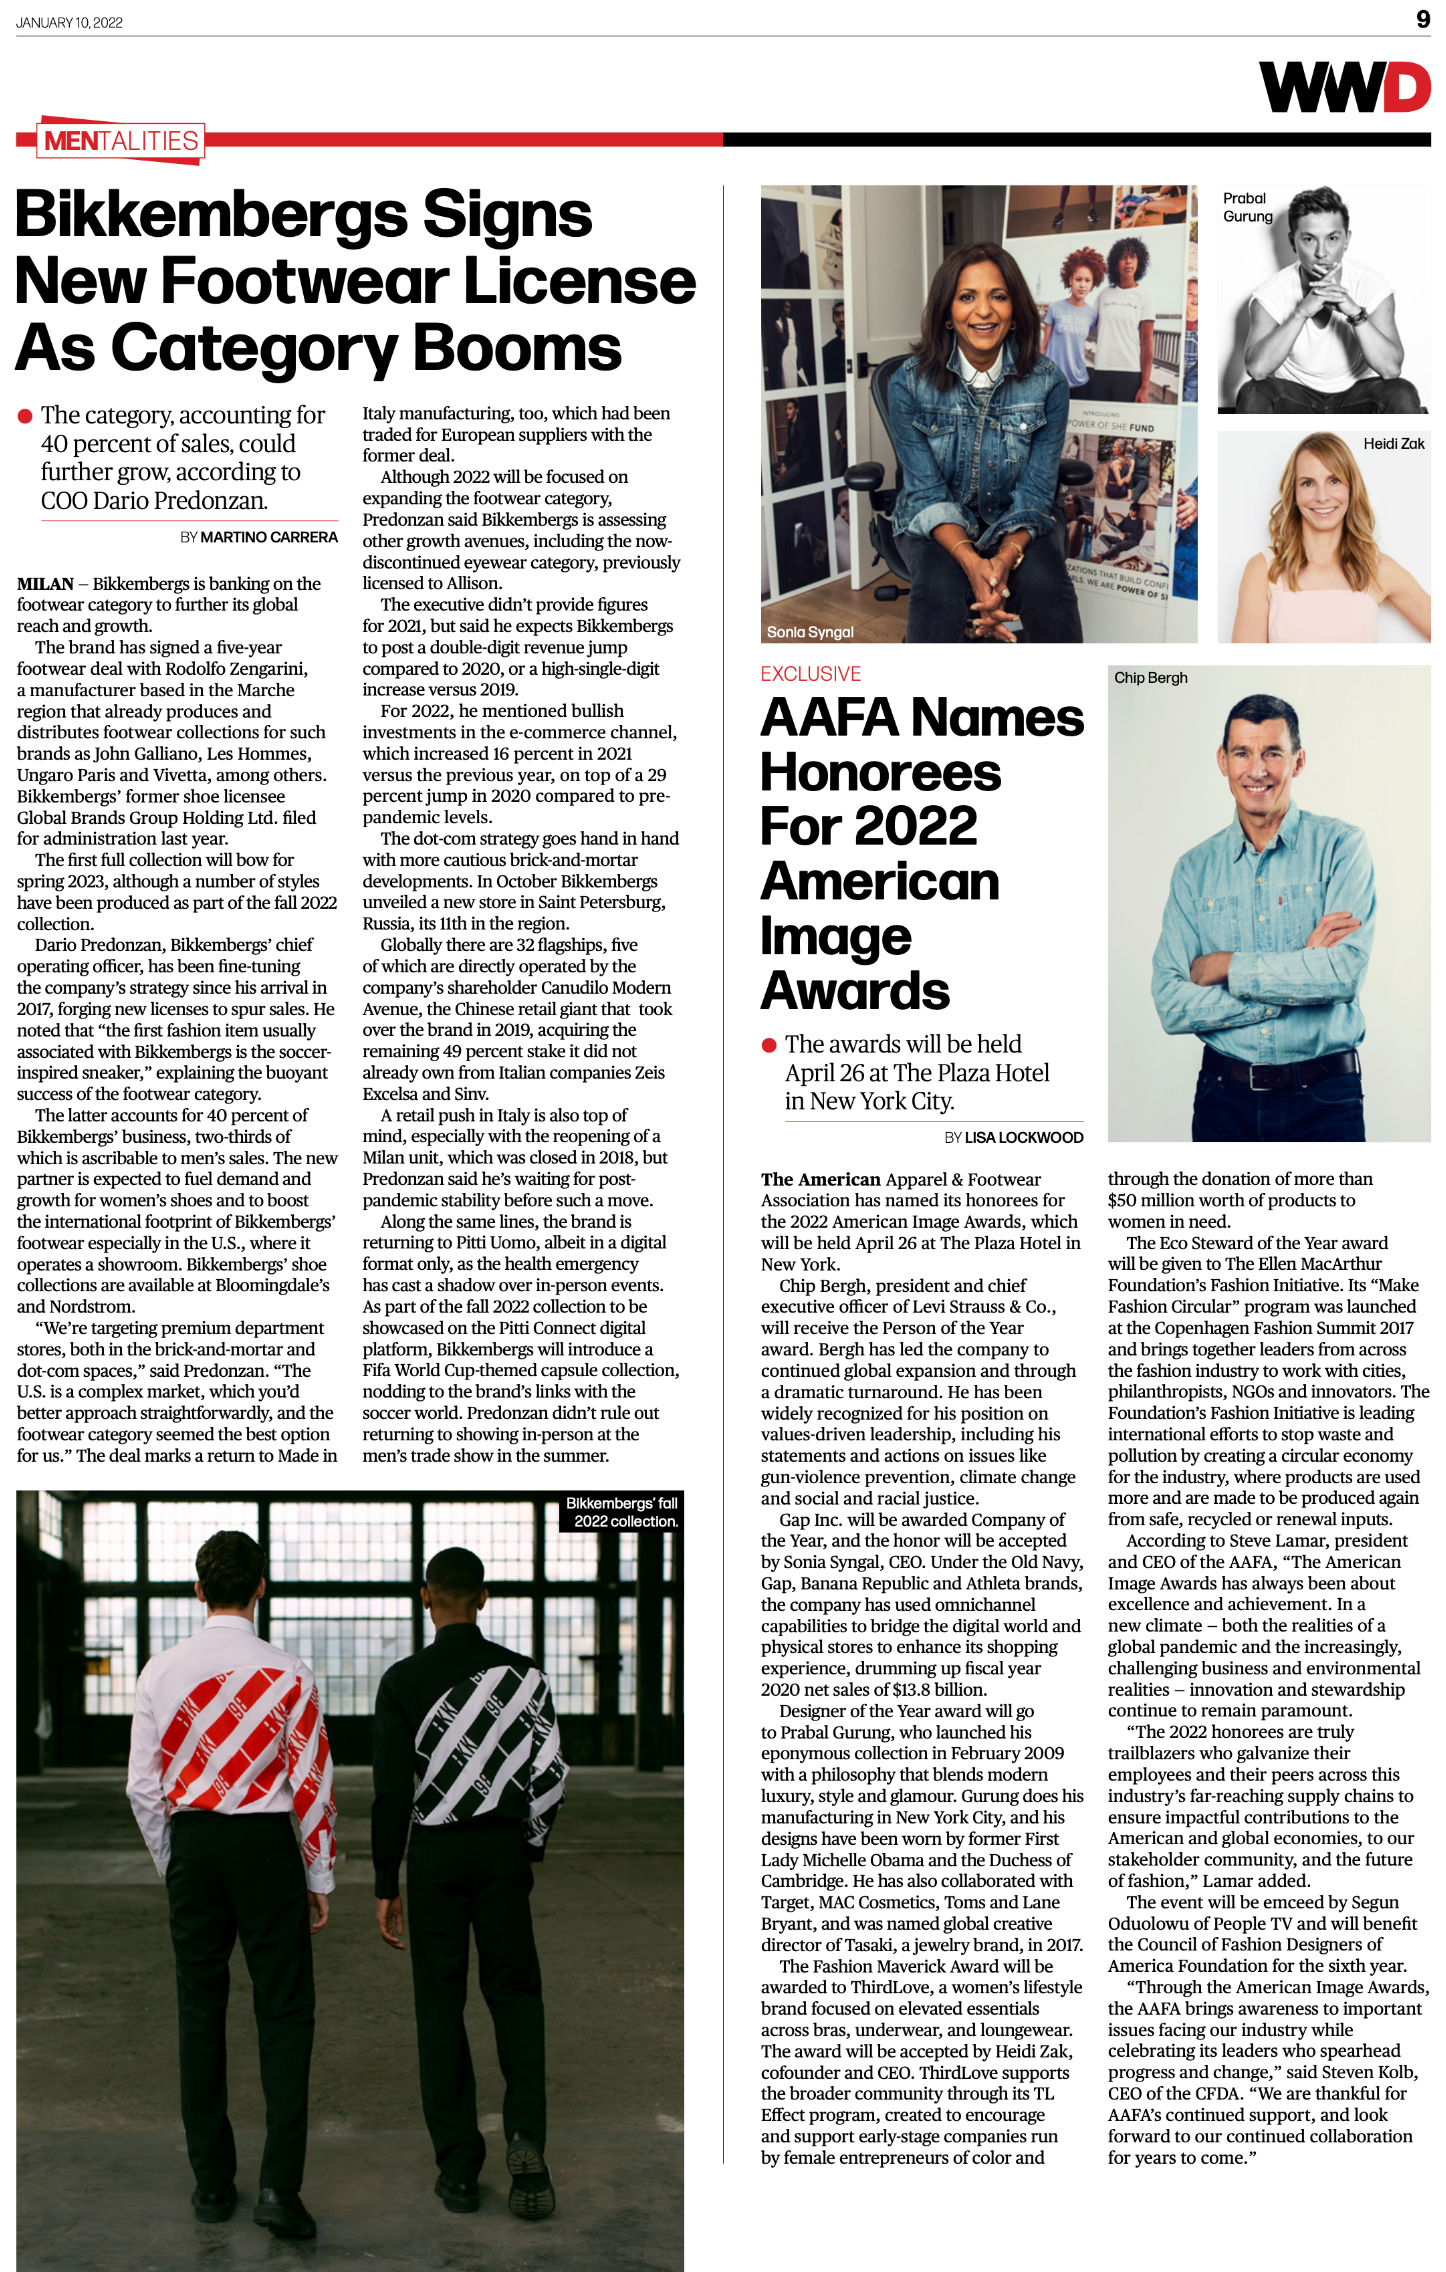 WWD article from 01.10.22 announcing 2022 American Image Awards full article